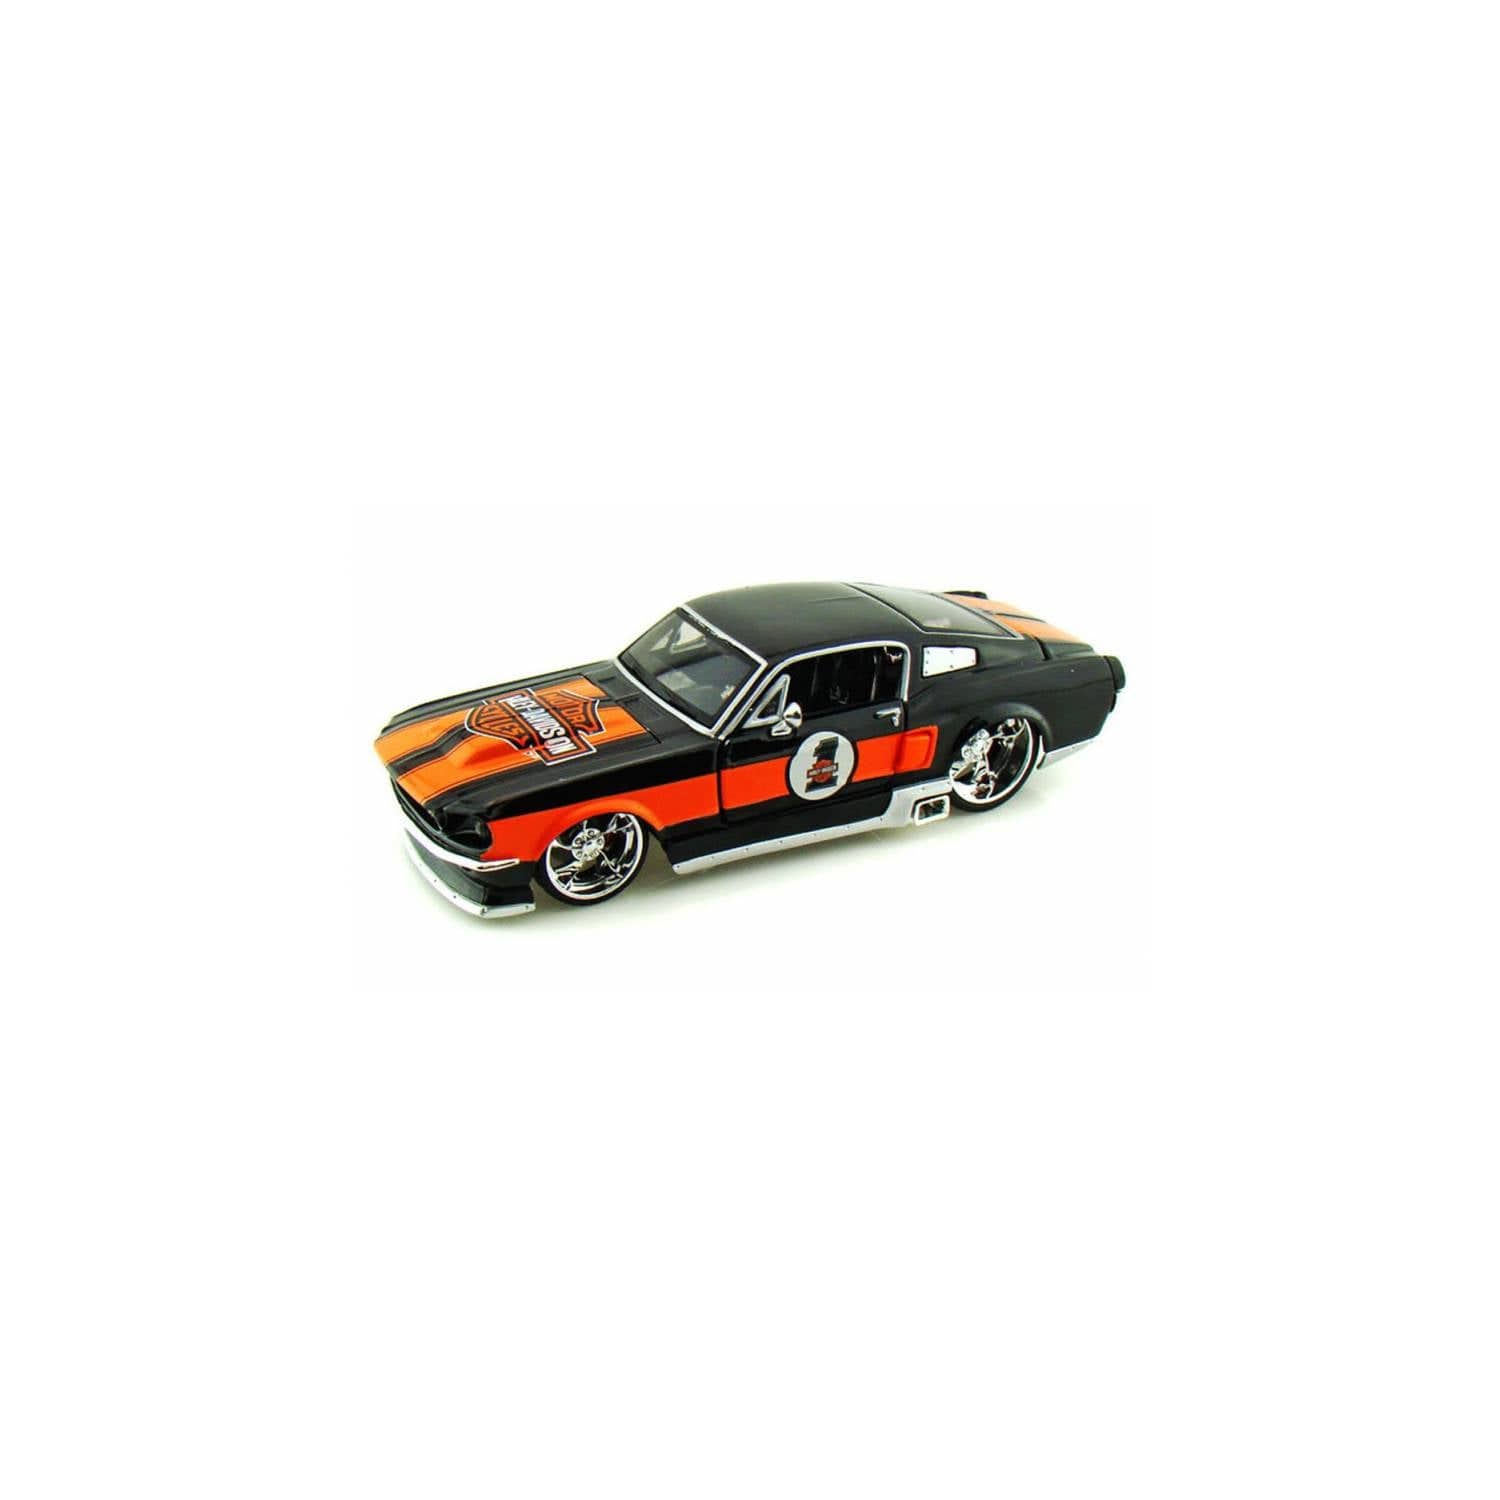 Buy 1:24 Ford Mustang, Asst » Dubaiprices in Uganda